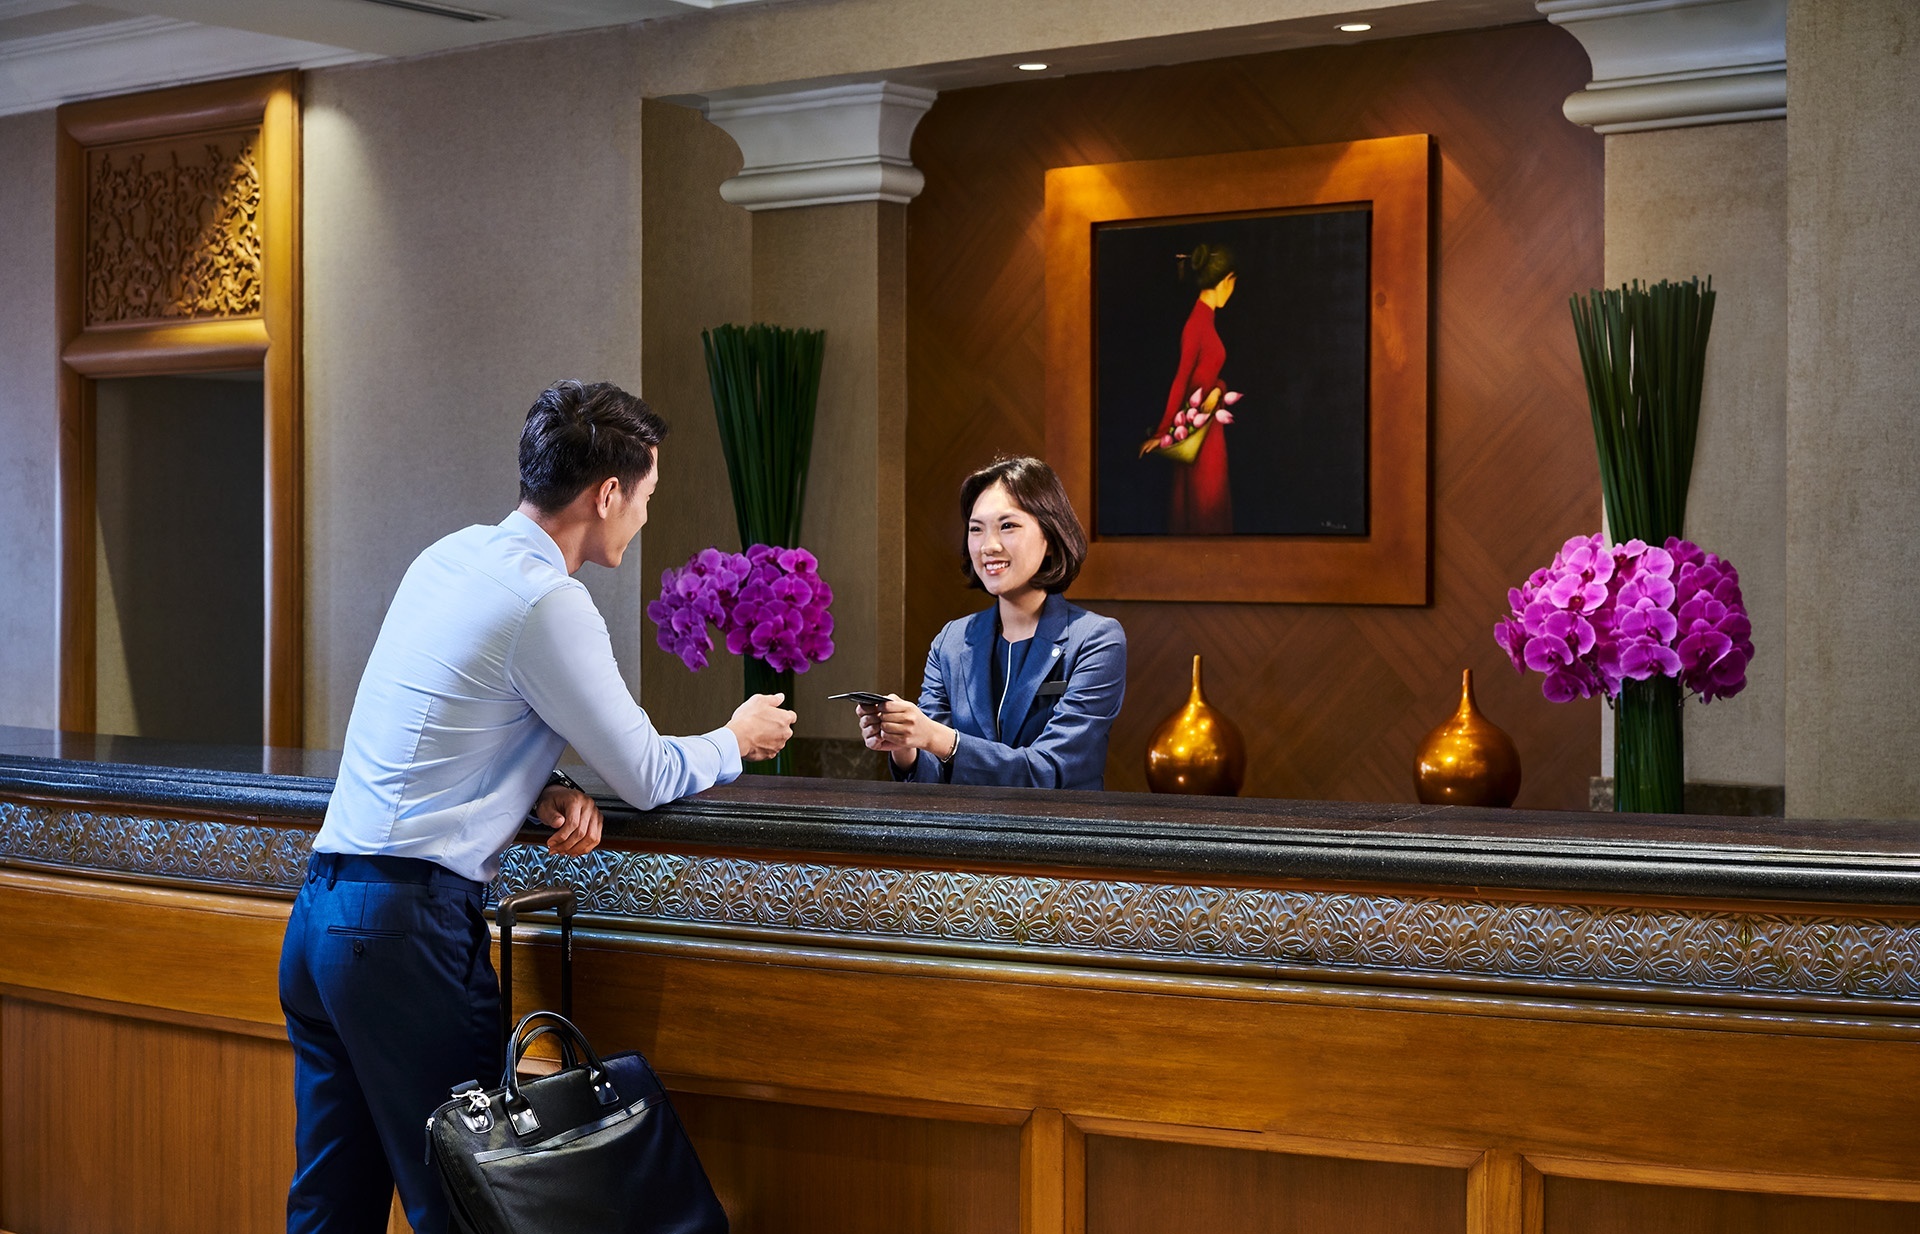 Marriott International Hotels to develop high-quality human resources for hospitality